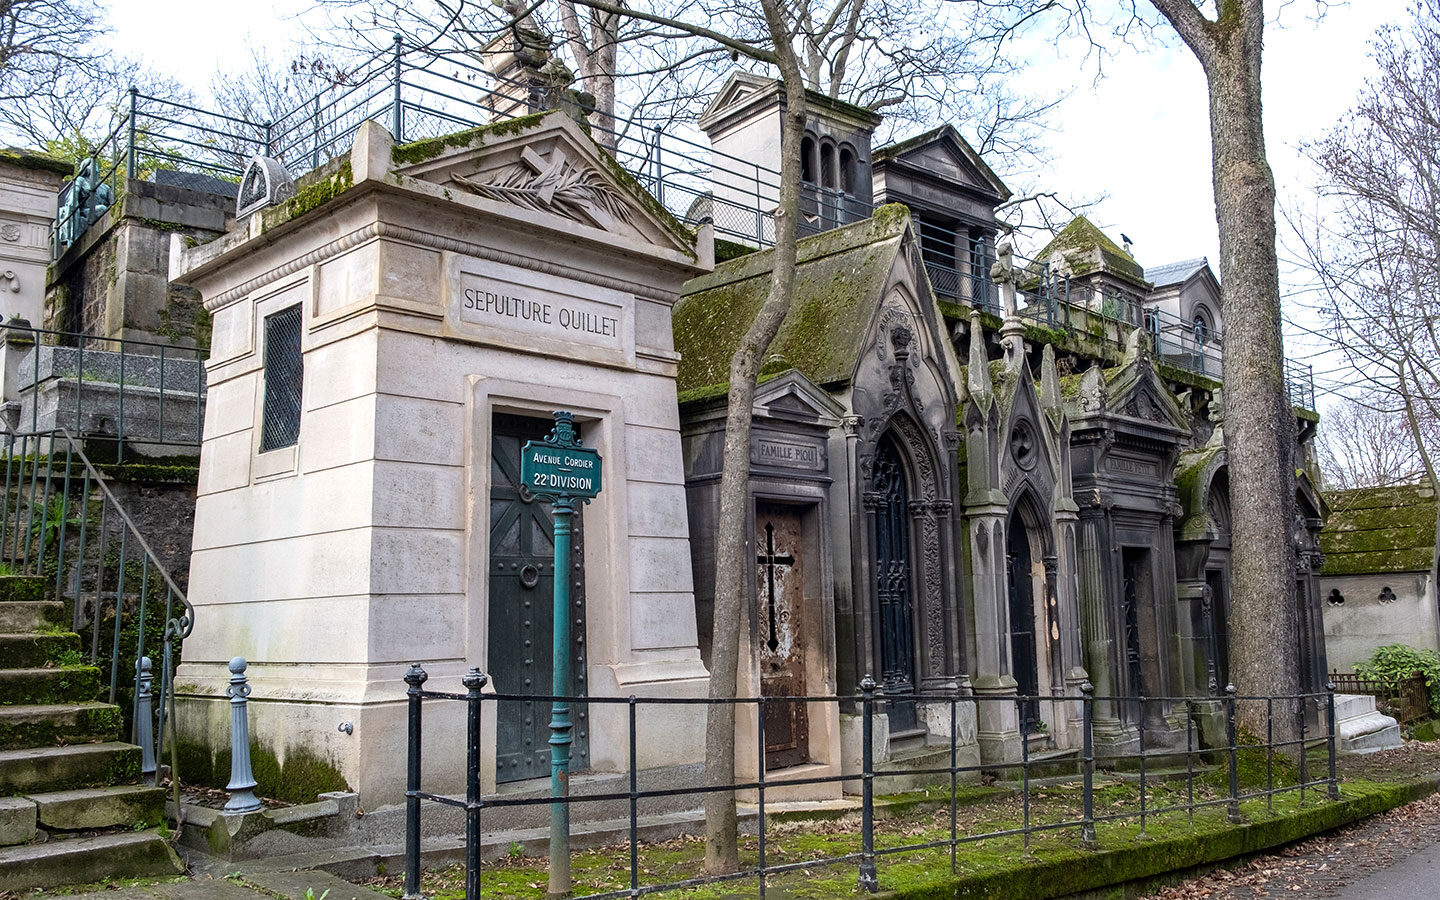 Montmartre cemetery – alternative things to do in Paris